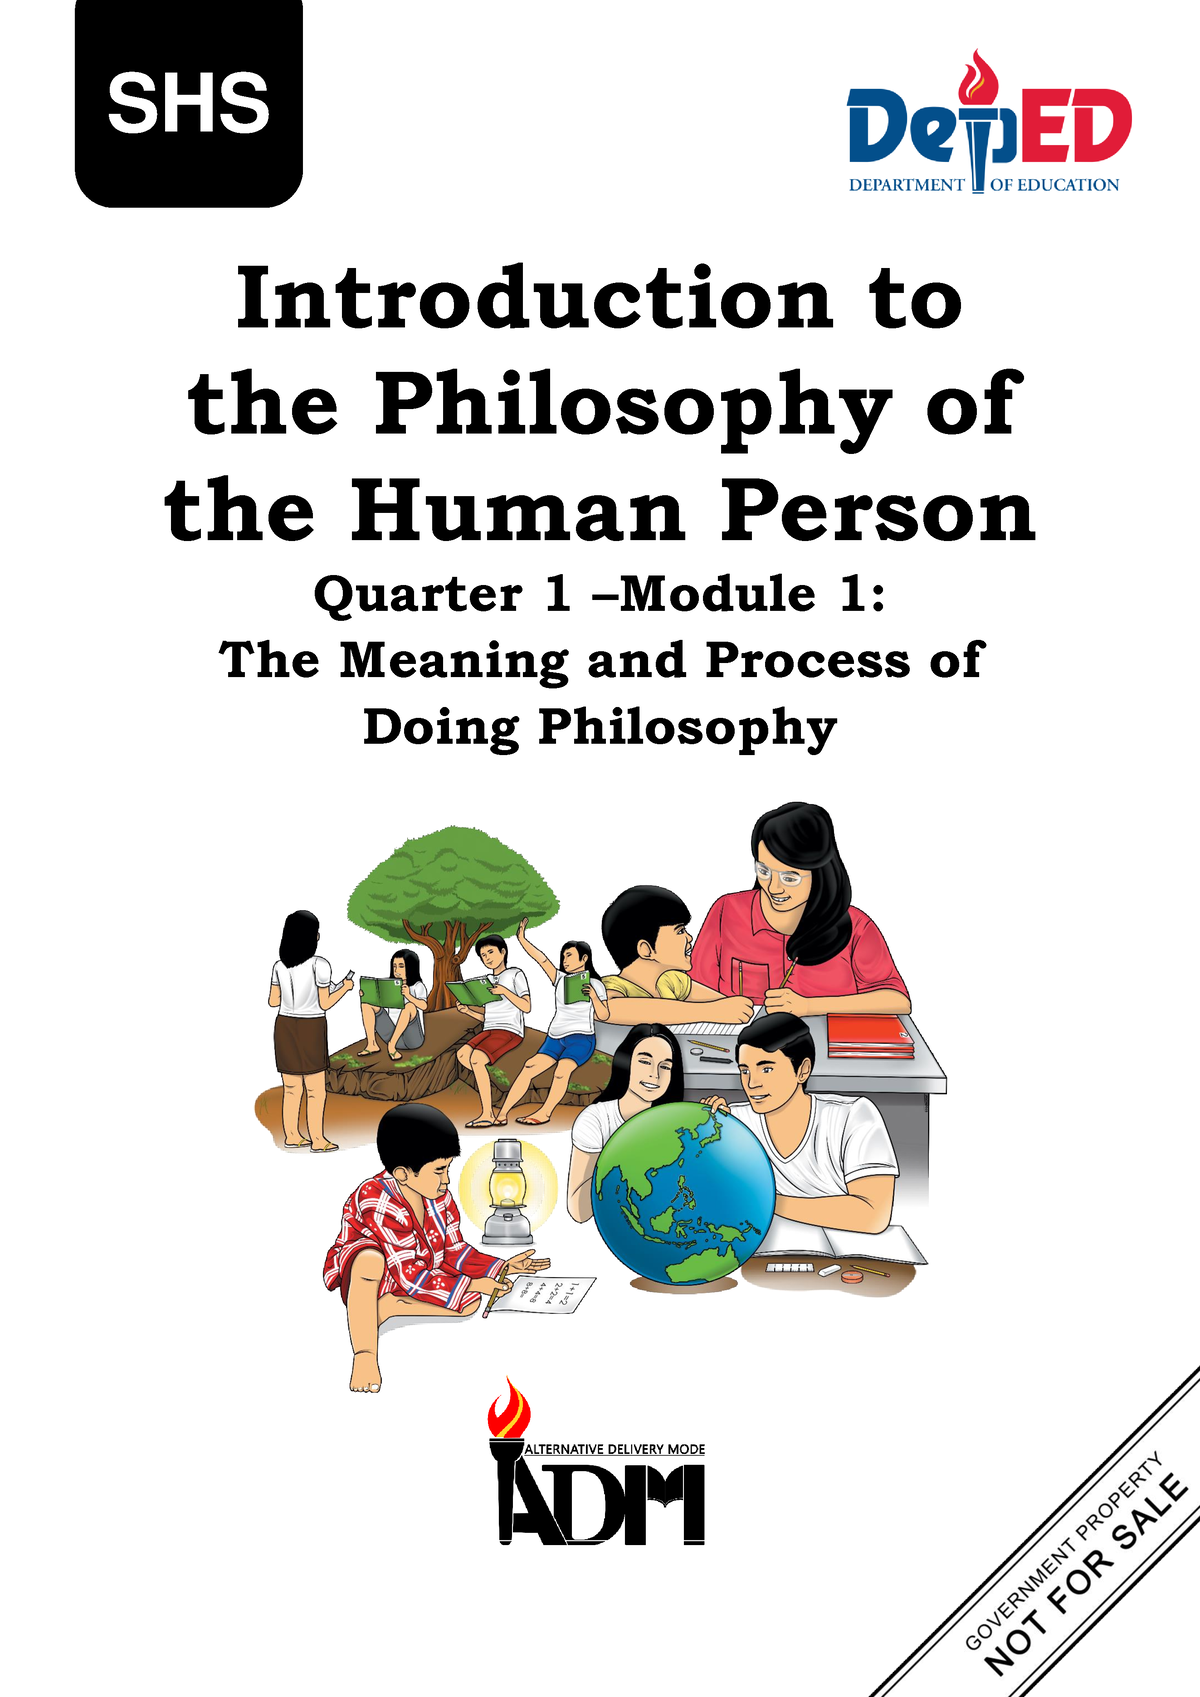 Q1 Shs Intro To The Philosophy Of The Human Person Module 1 Introduction To The Philosophy Of 1841